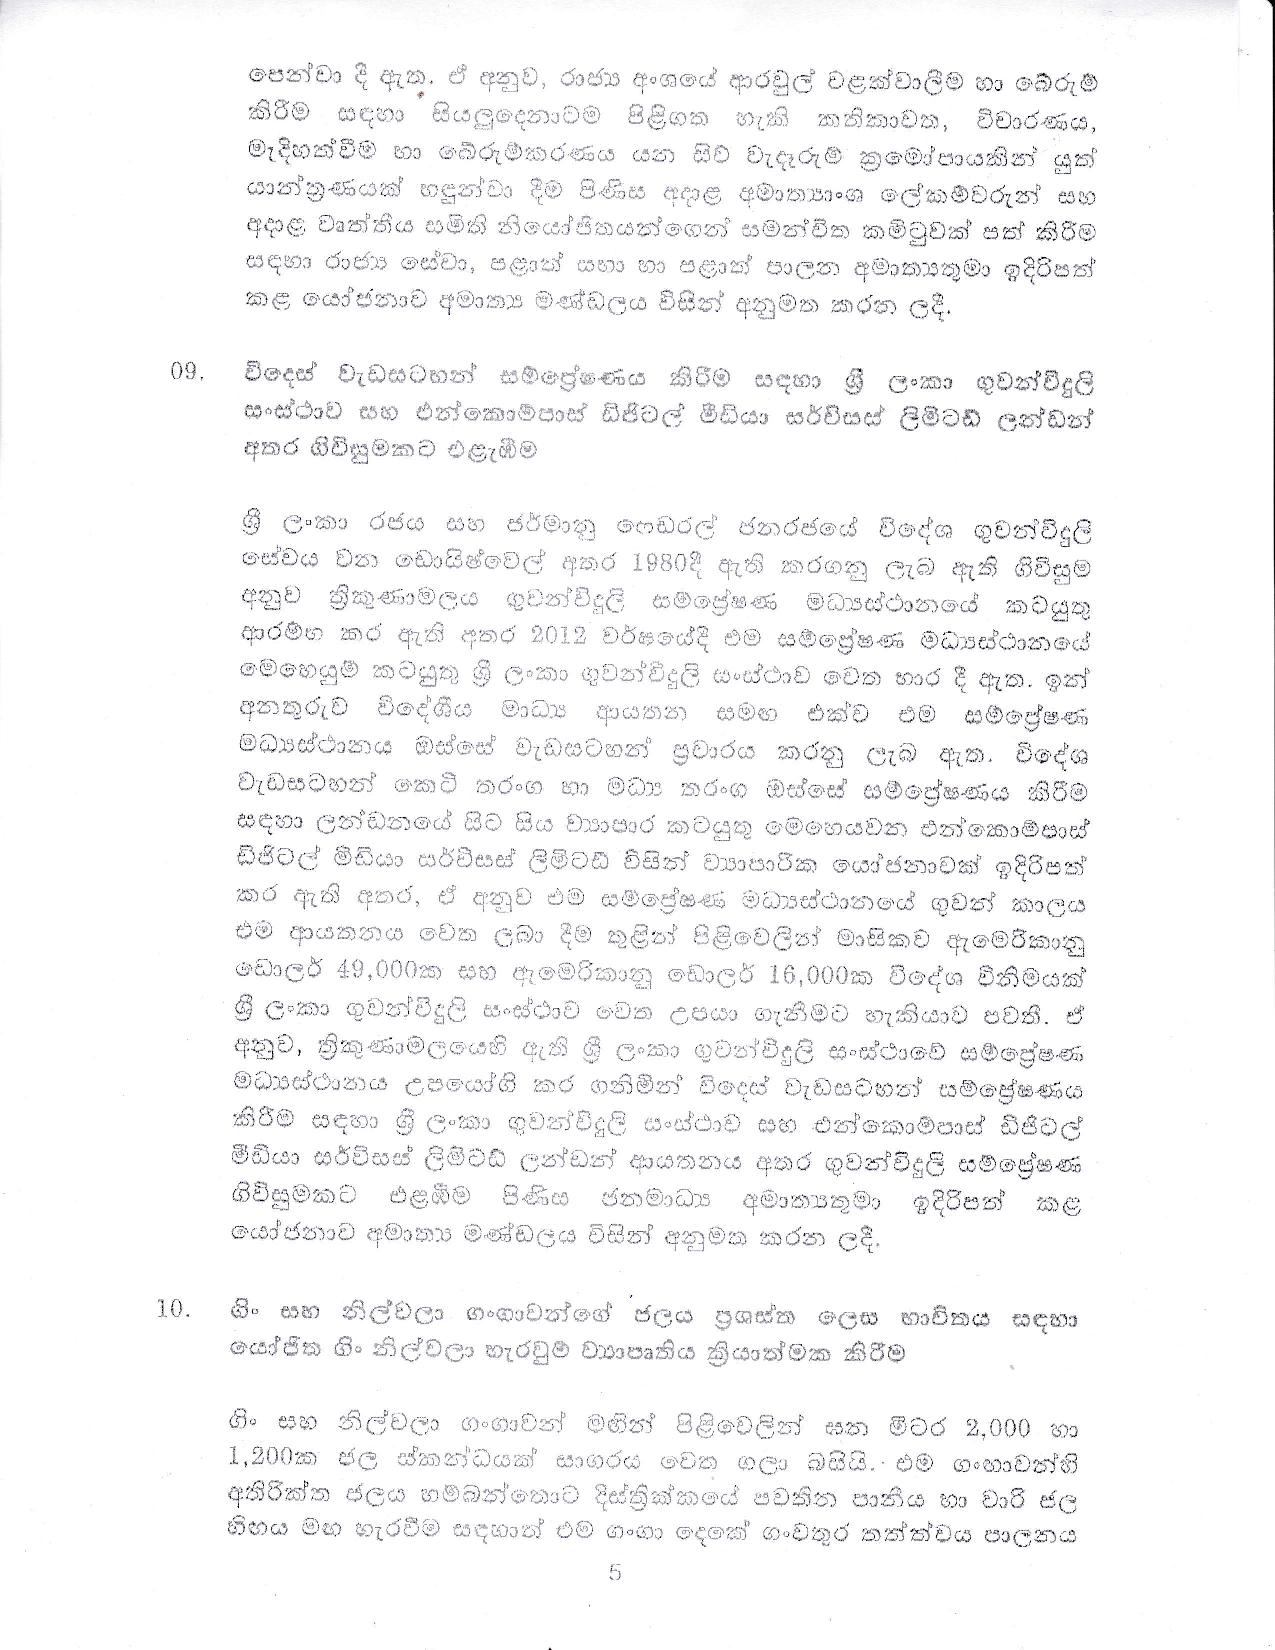 Cabinet Decision on 16.11.2020 page 005